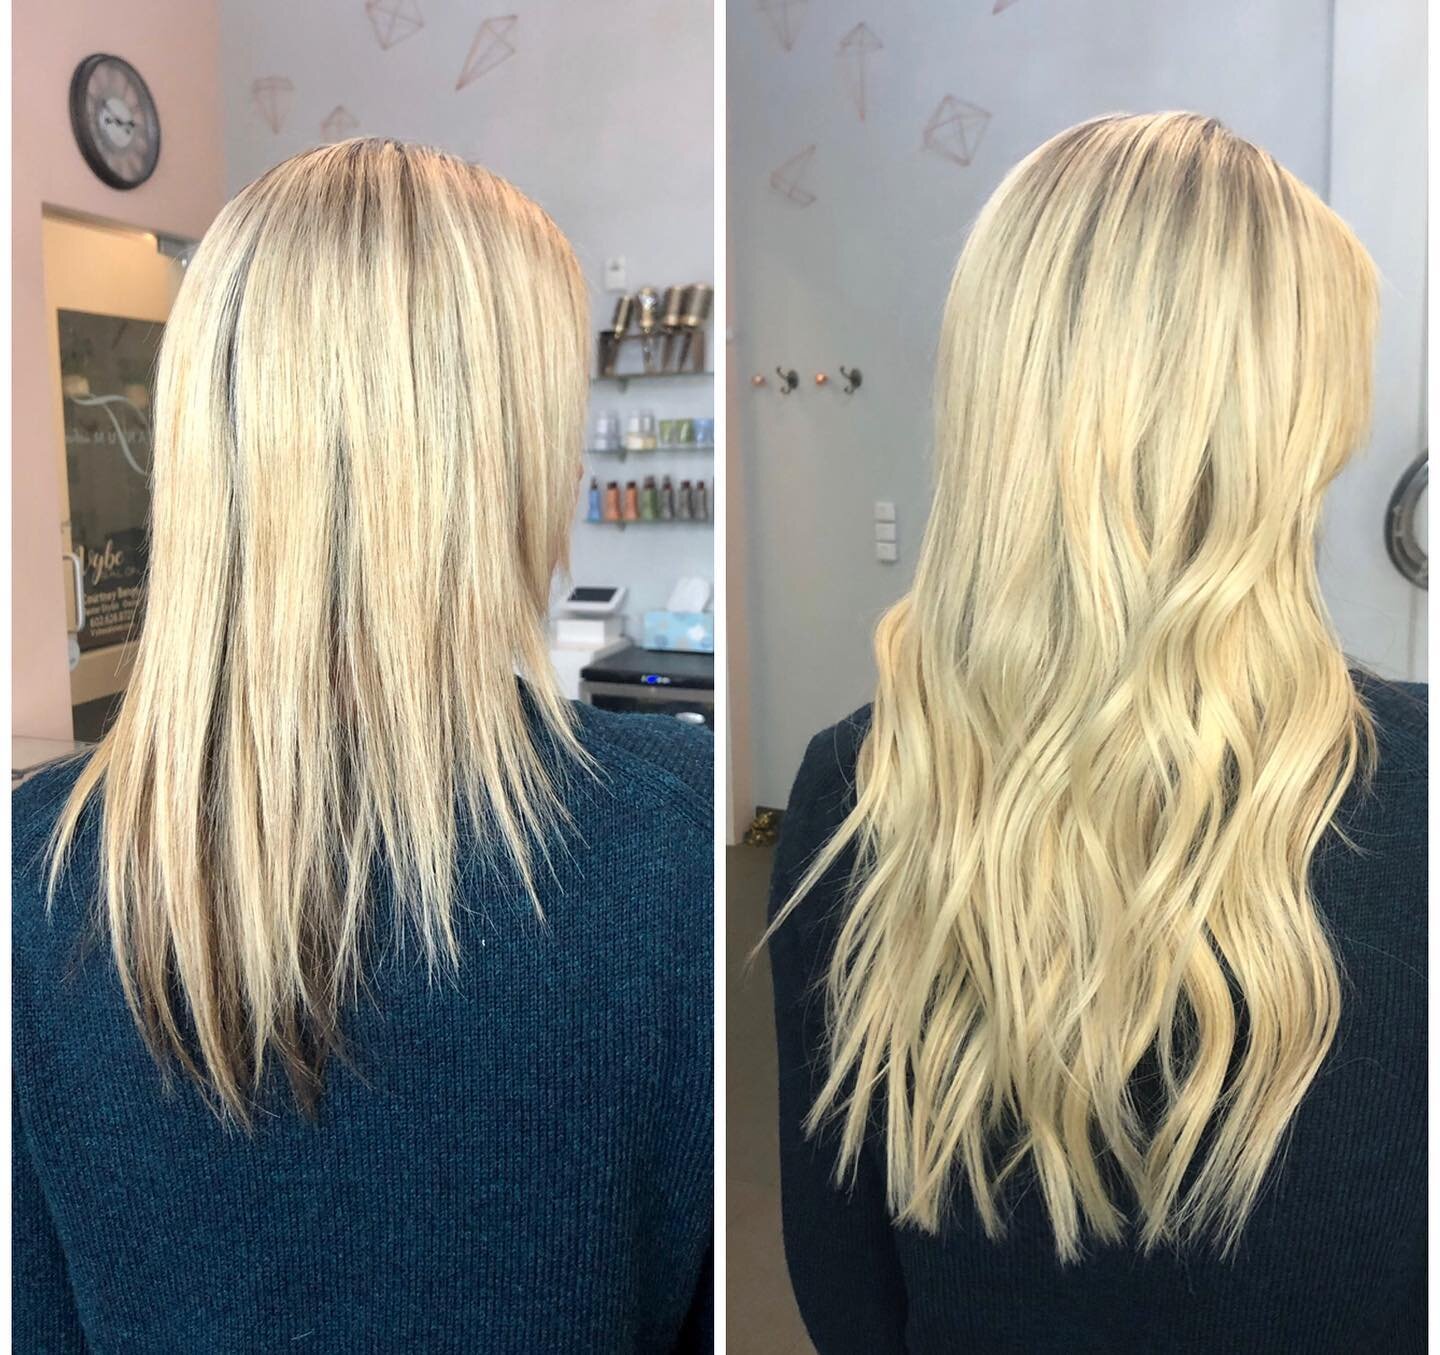 SERIOUSLY THOUGH!  Hair extensions can make such a difference 🙌🏼 the length and fullness was enhanced on this beautiful head of hair. Her natural was great but the sides aren&rsquo;t growing as fast as the back. @thekaceywelchmethod helped bring th